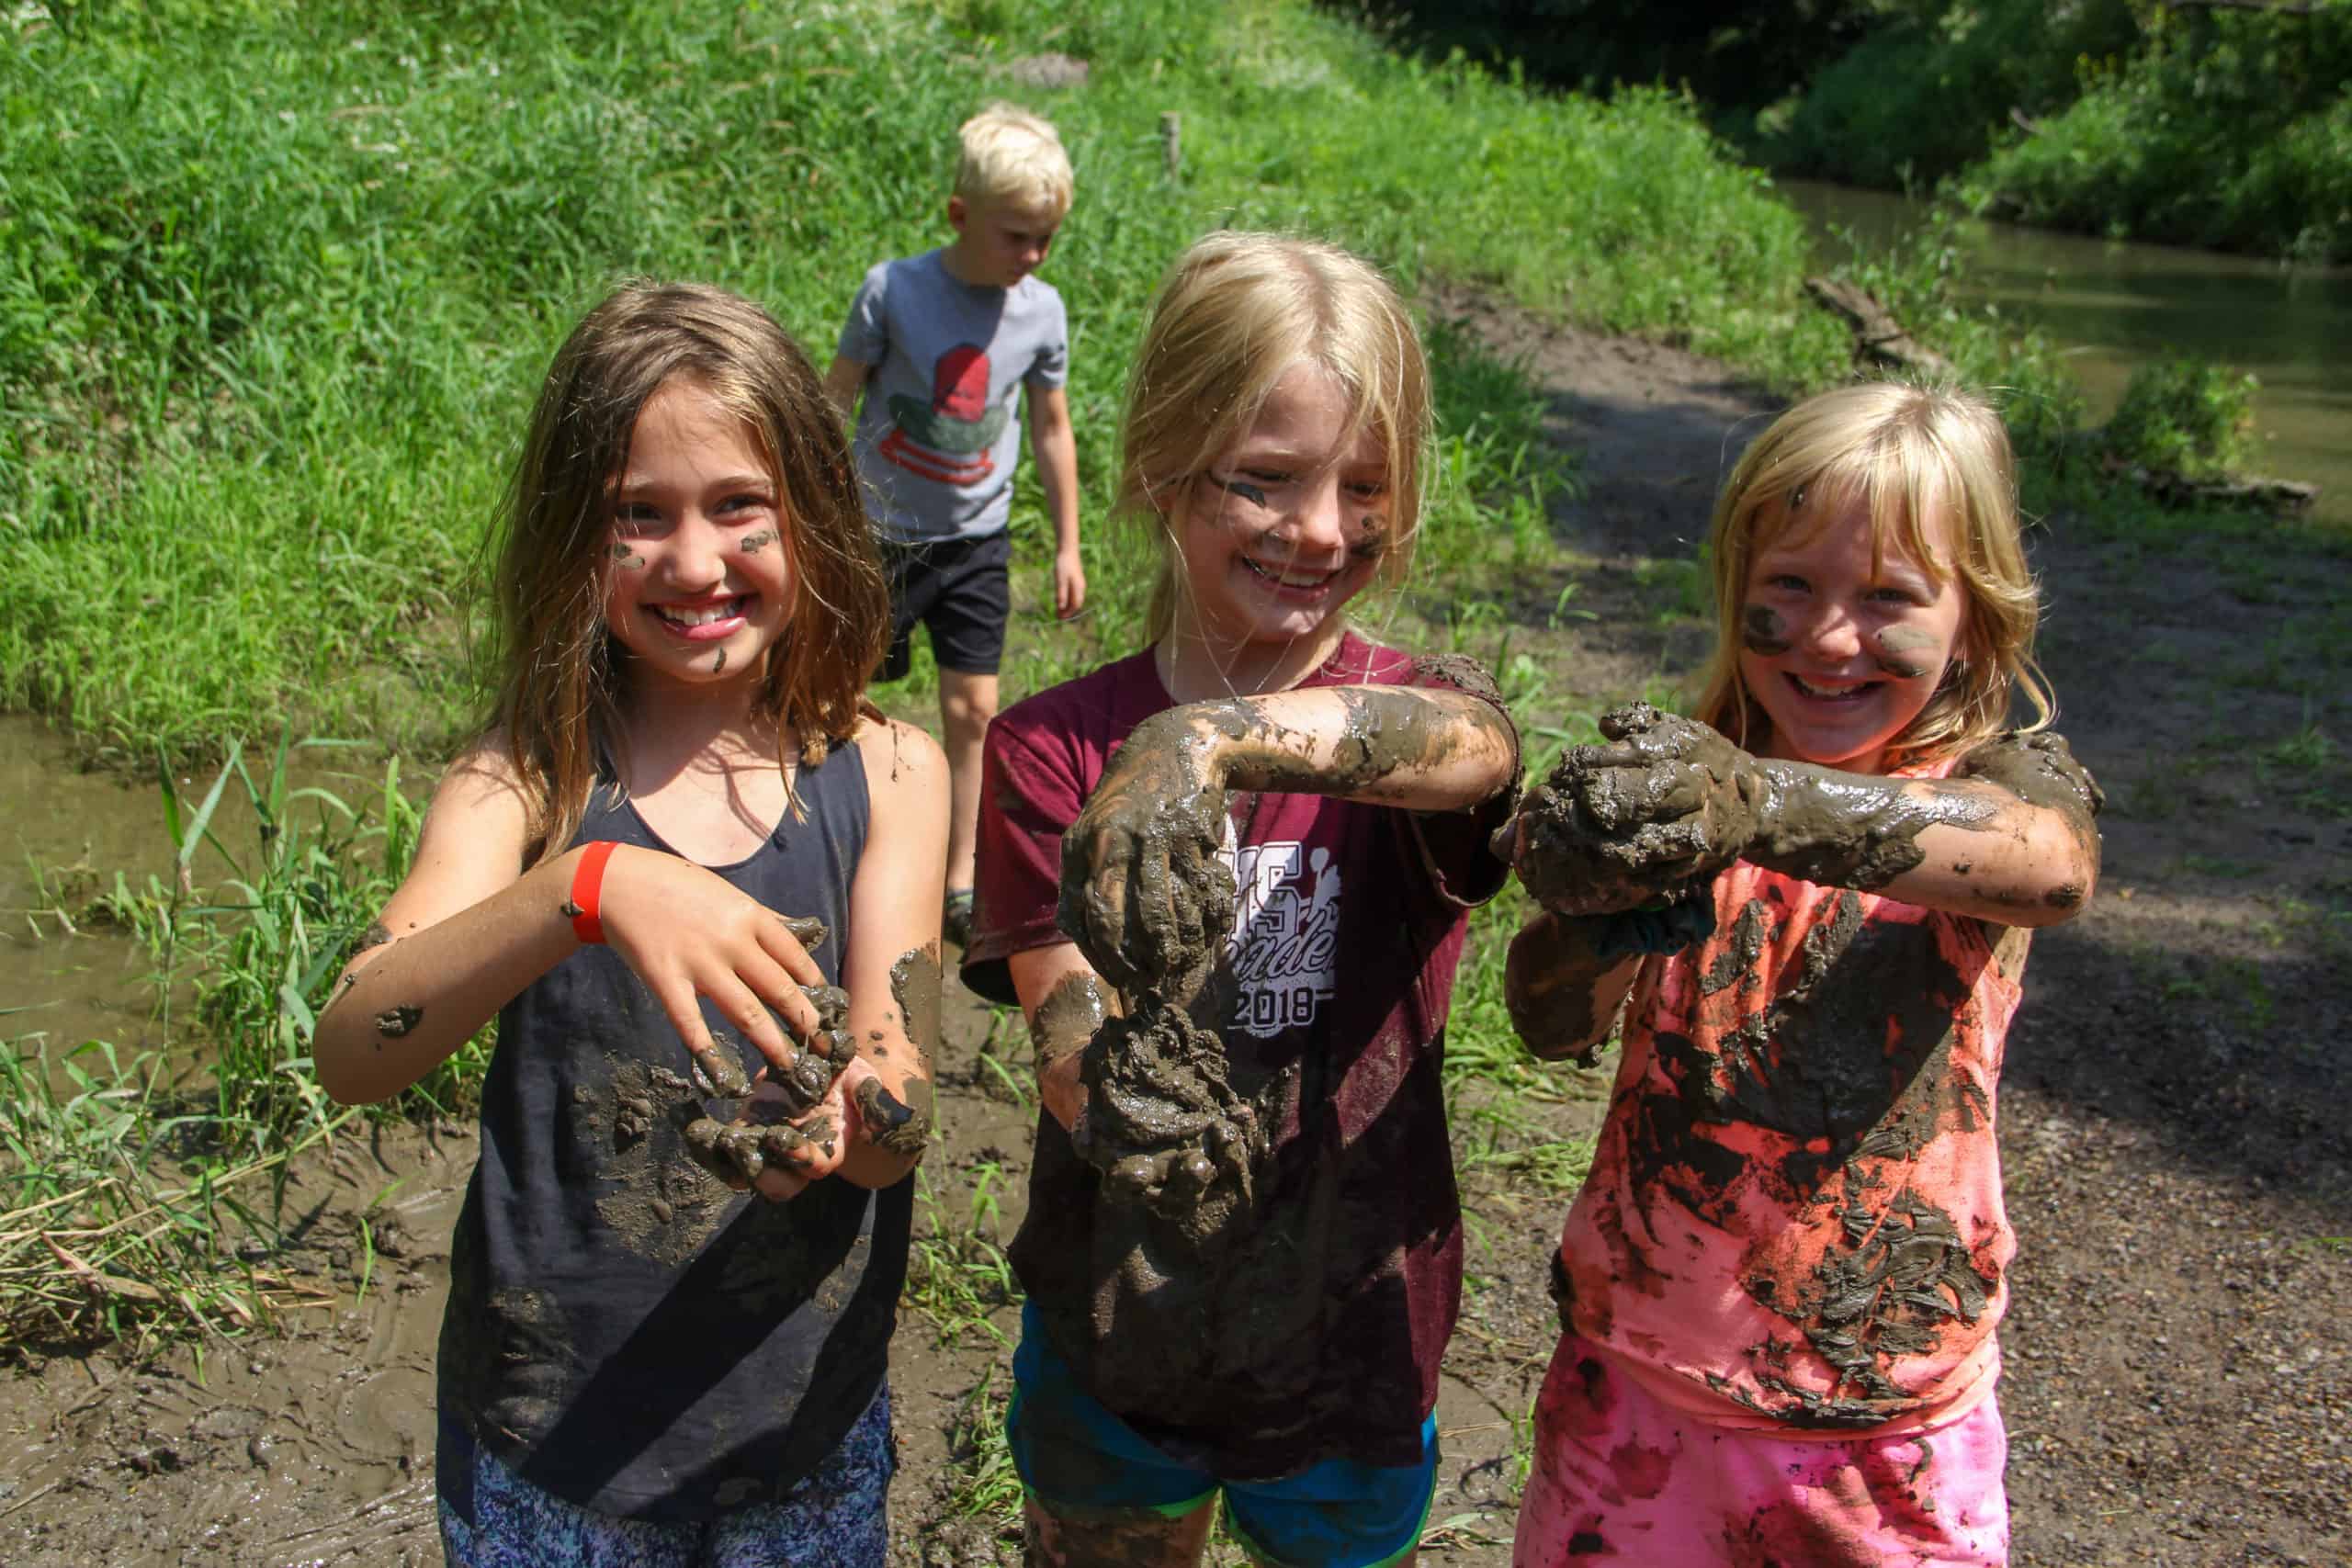 Three young girls playing in the mud together at the creek.